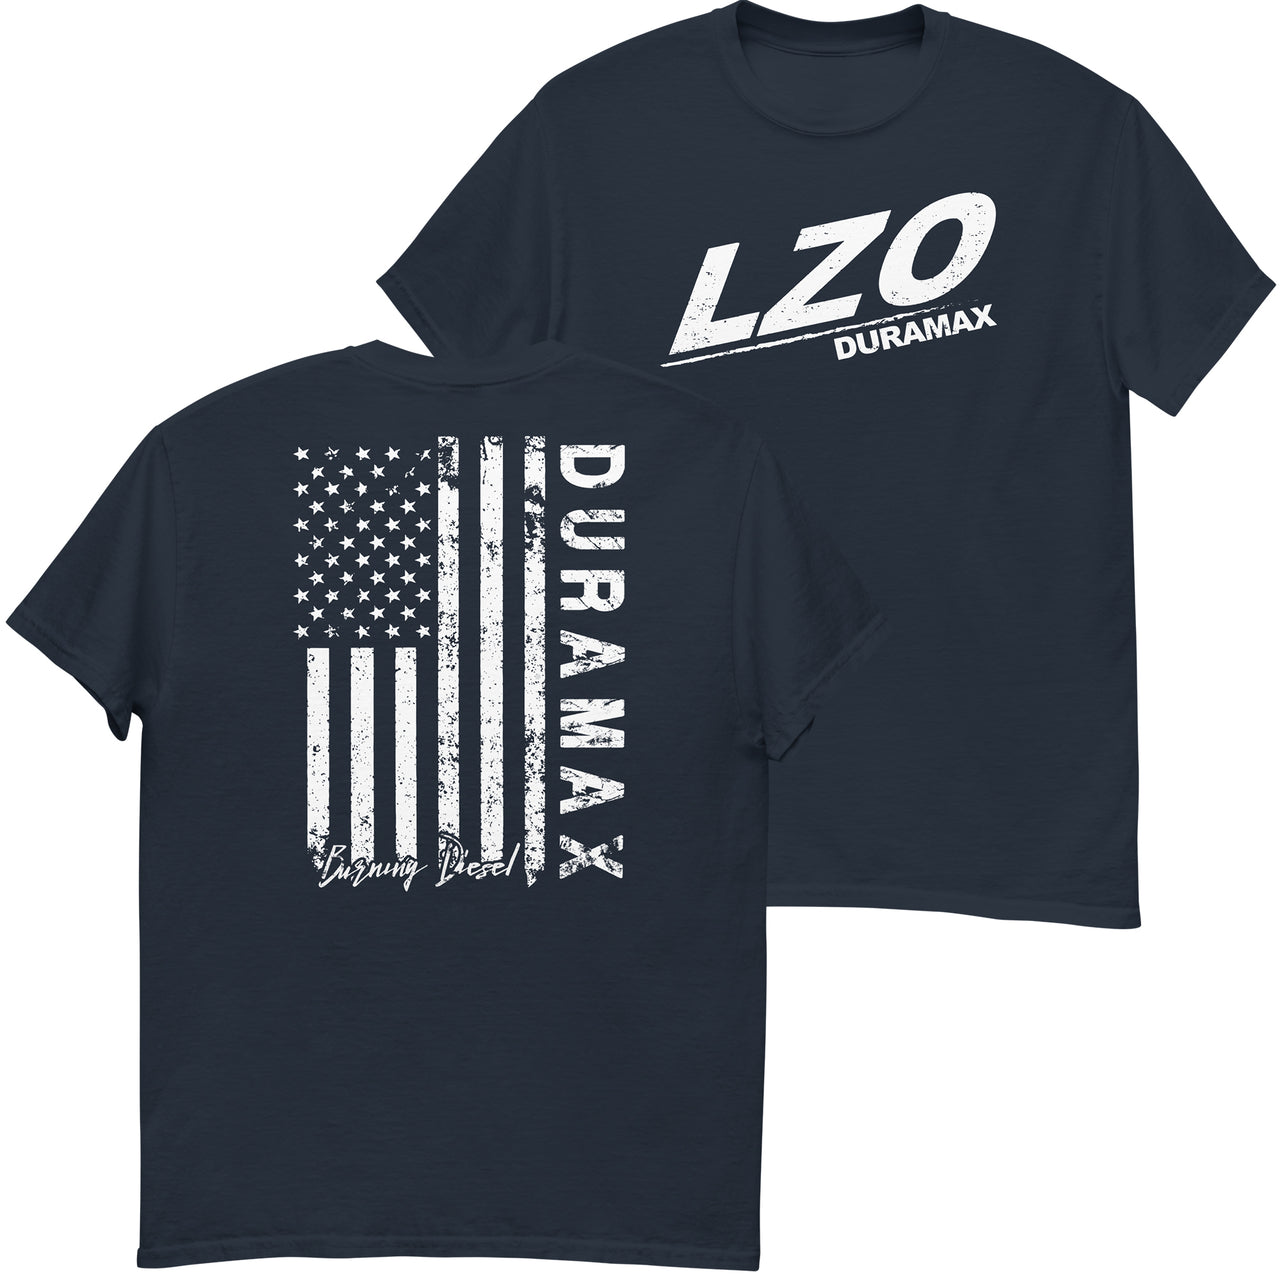 LZO Duramax T-Shirt With American Flag Design in navy